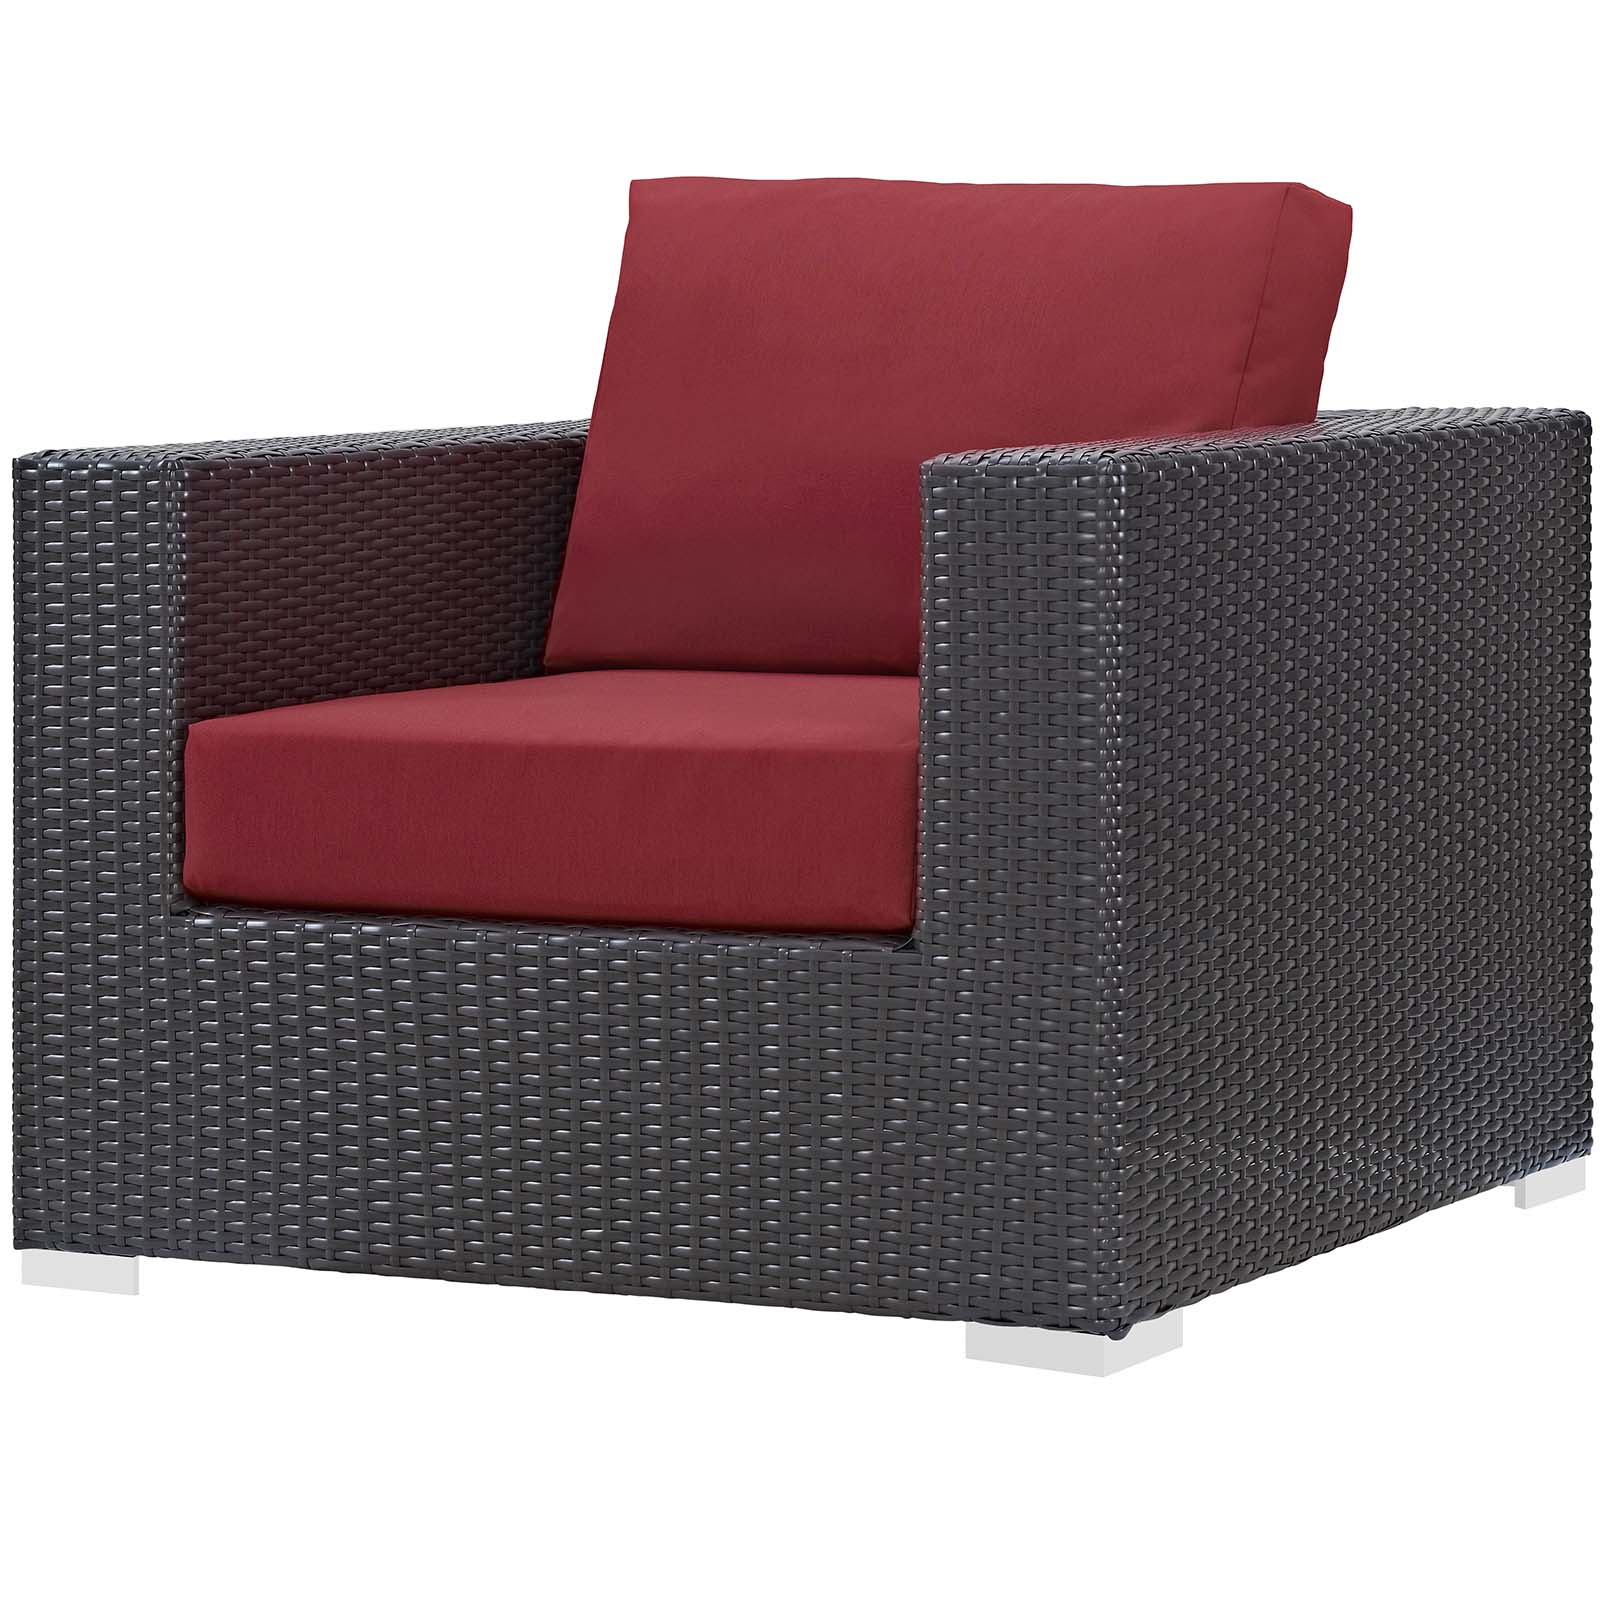 Contemporary Modern Urban Designer Outdoor Patio Balcony Garden Furniture Lounge Sofa, Chair and Coffee Table Fire Pit Set, Fabric Rattan Wicker, Red - image 4 of 8